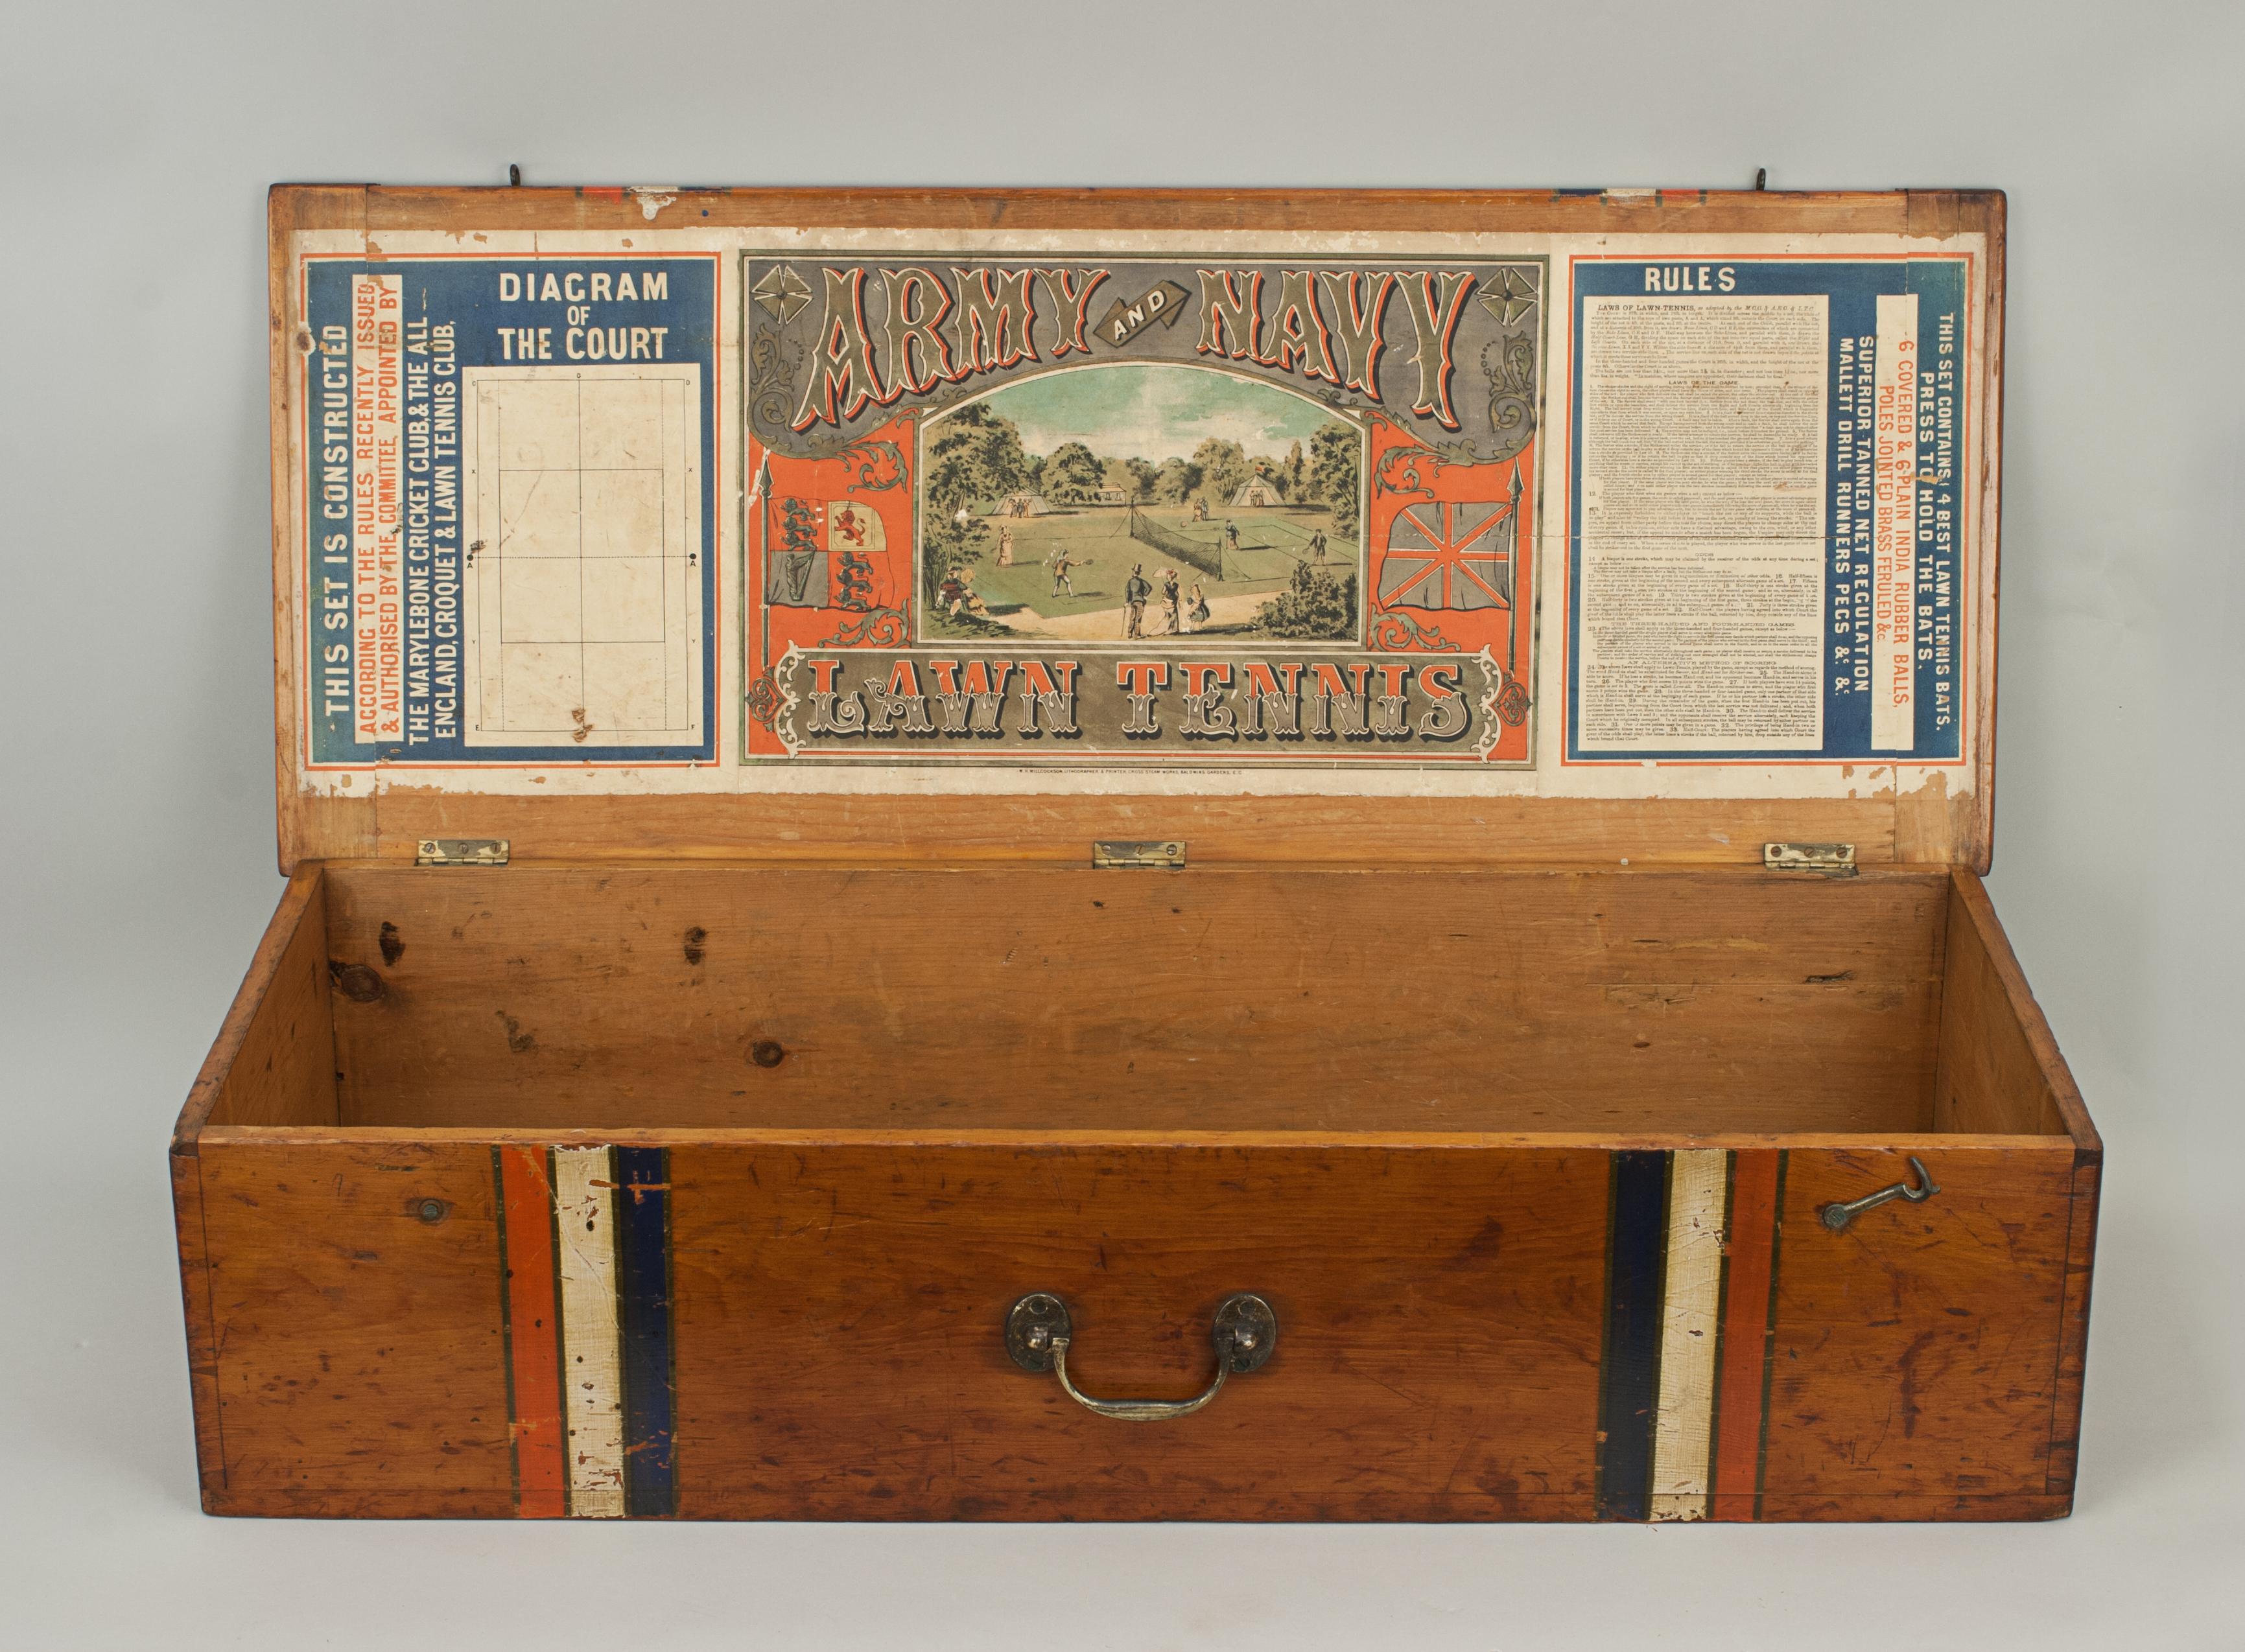 British Antique Lawn Tennis Box with Poster, Army and Navy, 1870, s